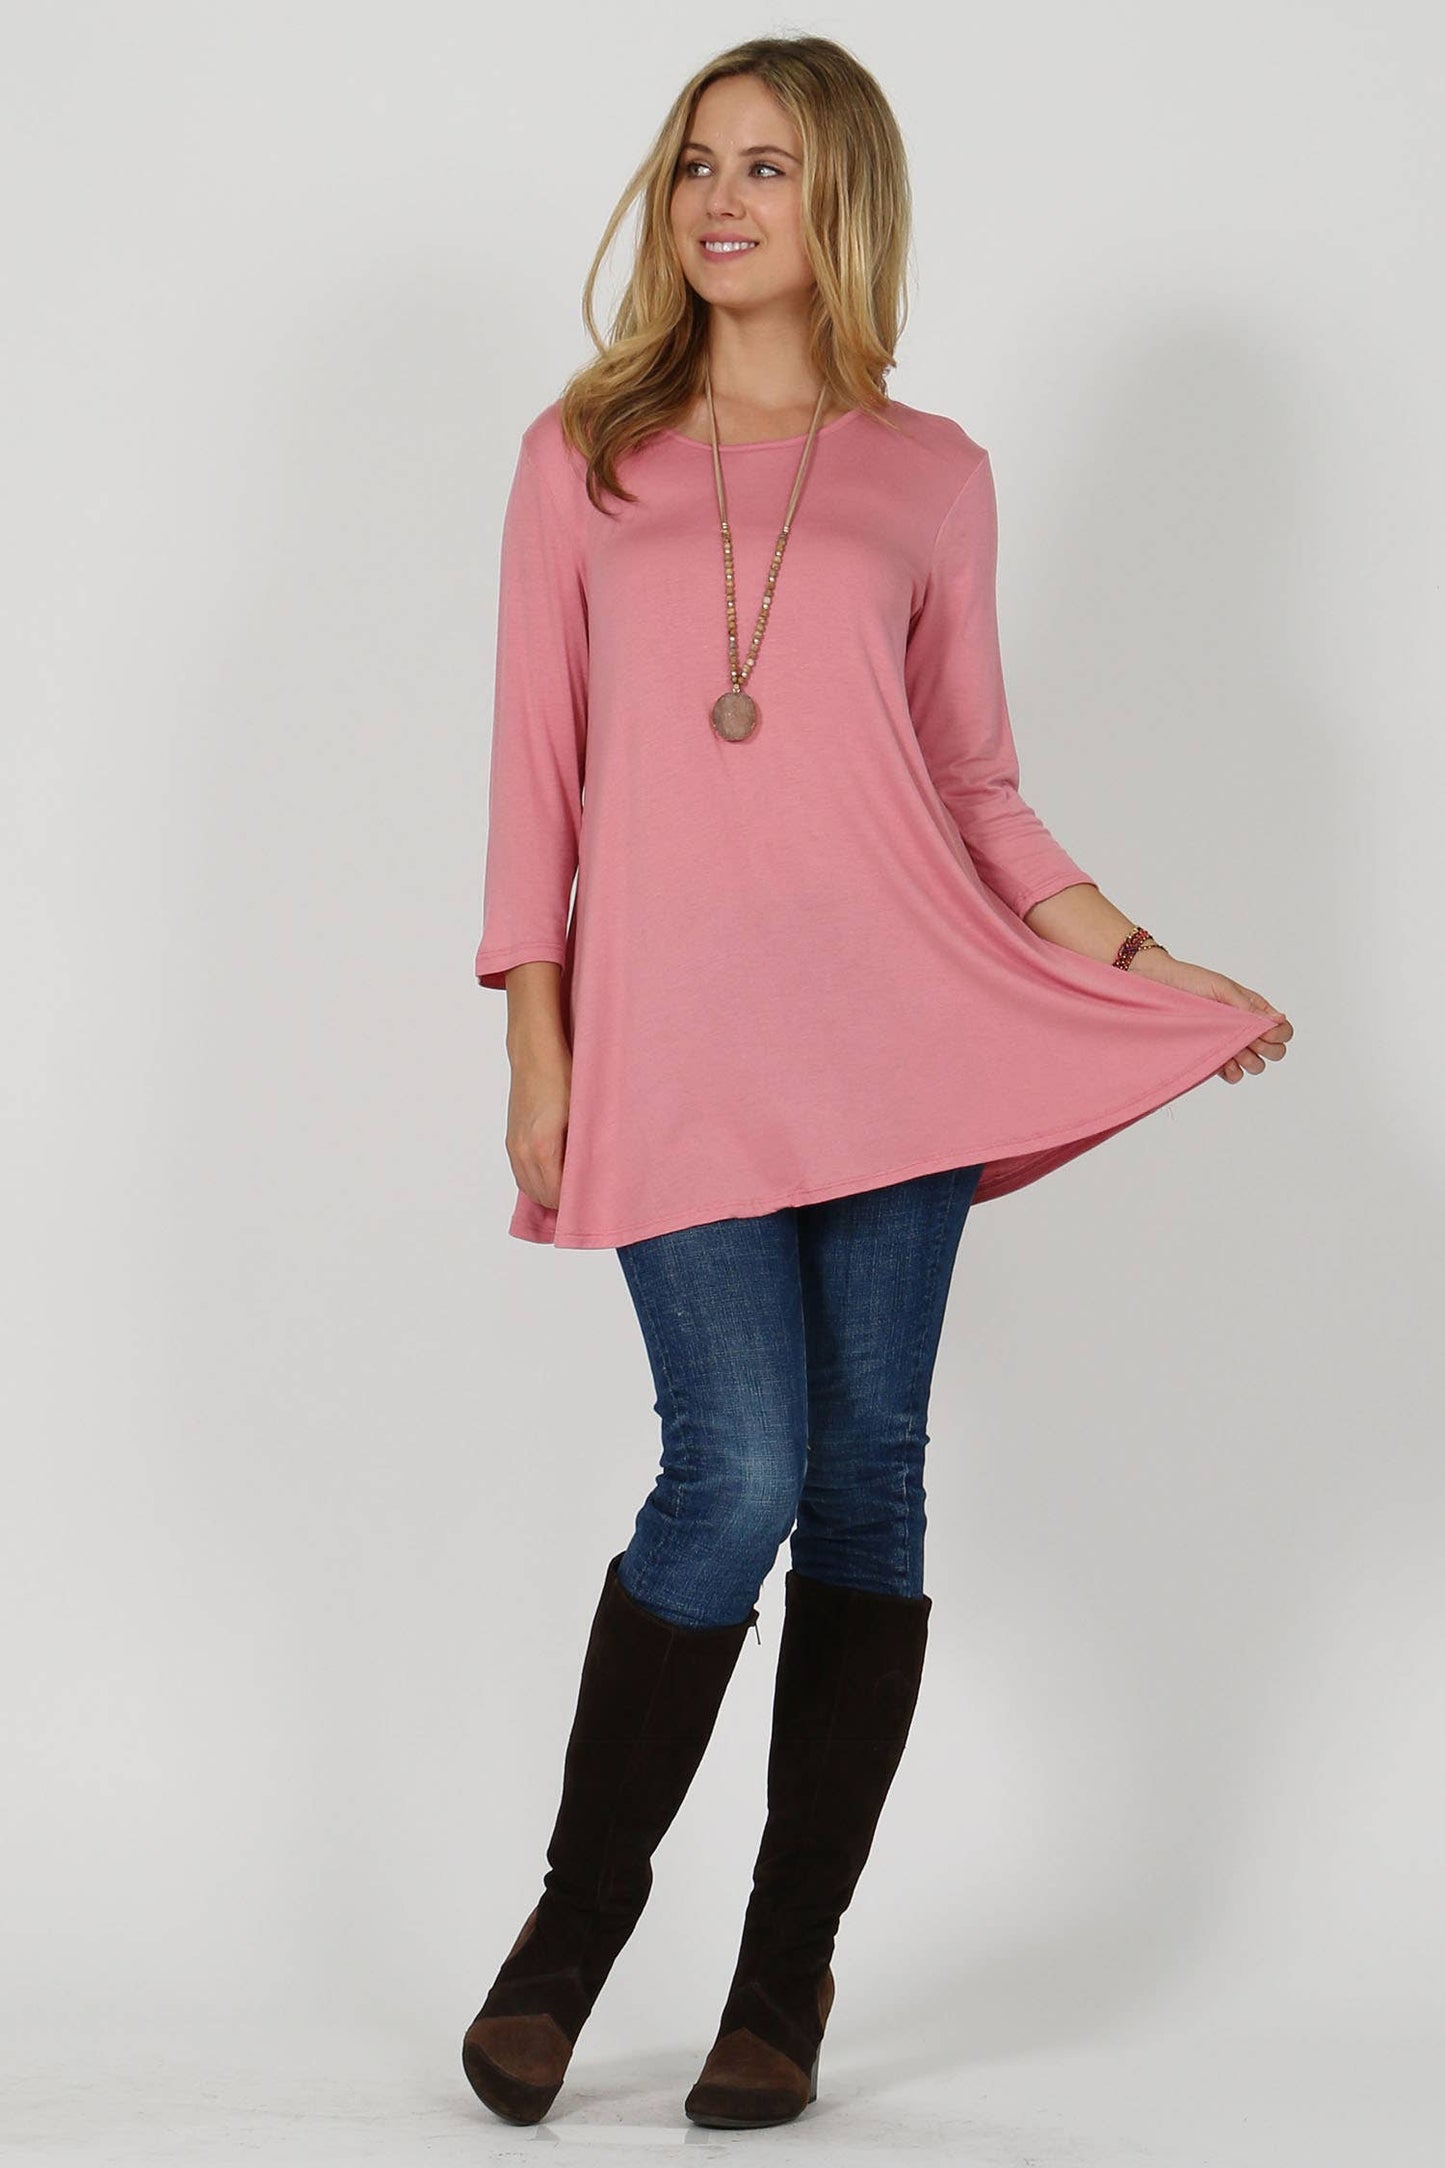 Taiga Top in Dusty Pink- Misses